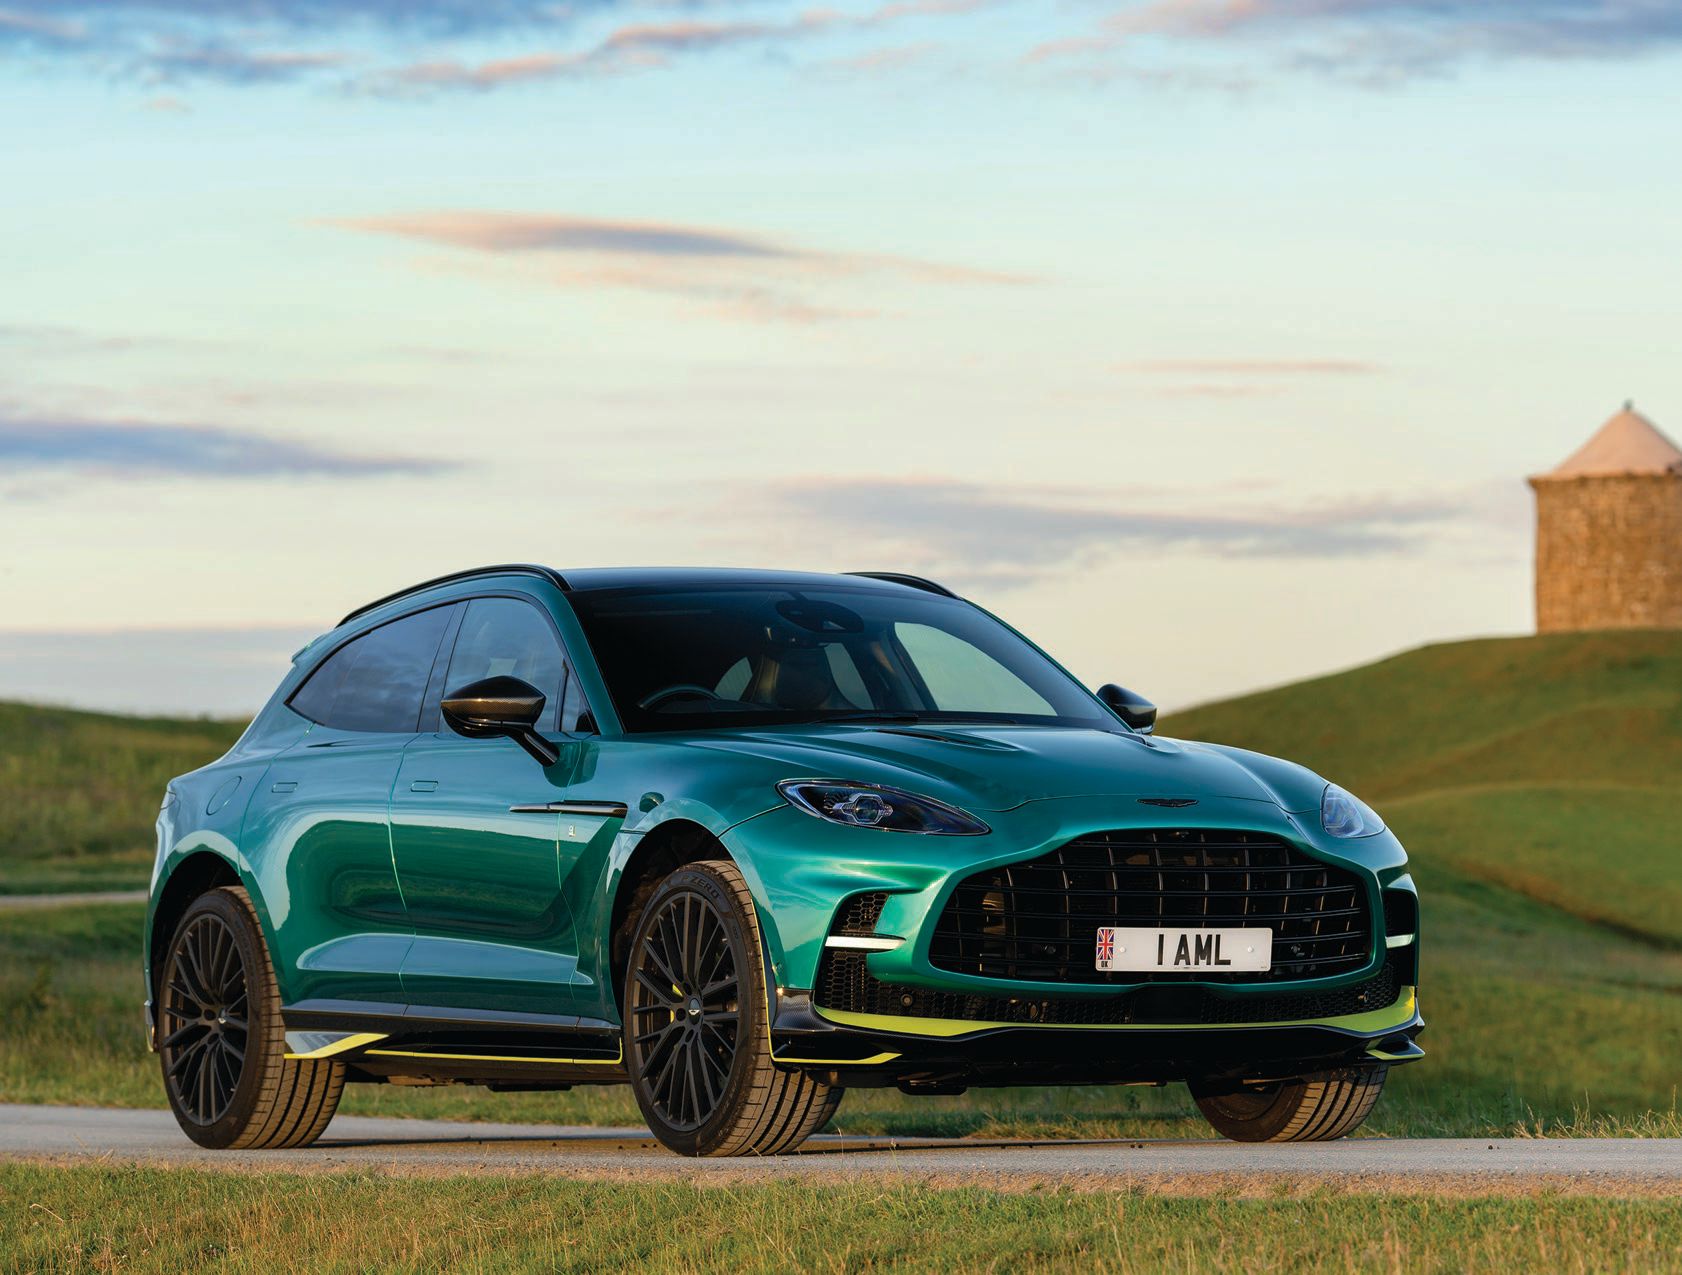 Aston Martin’s bespoke program Q lets buyers customize everything on their DBX707, down to the color of the front spoiler PHOTO COURTESY OF BRANDS